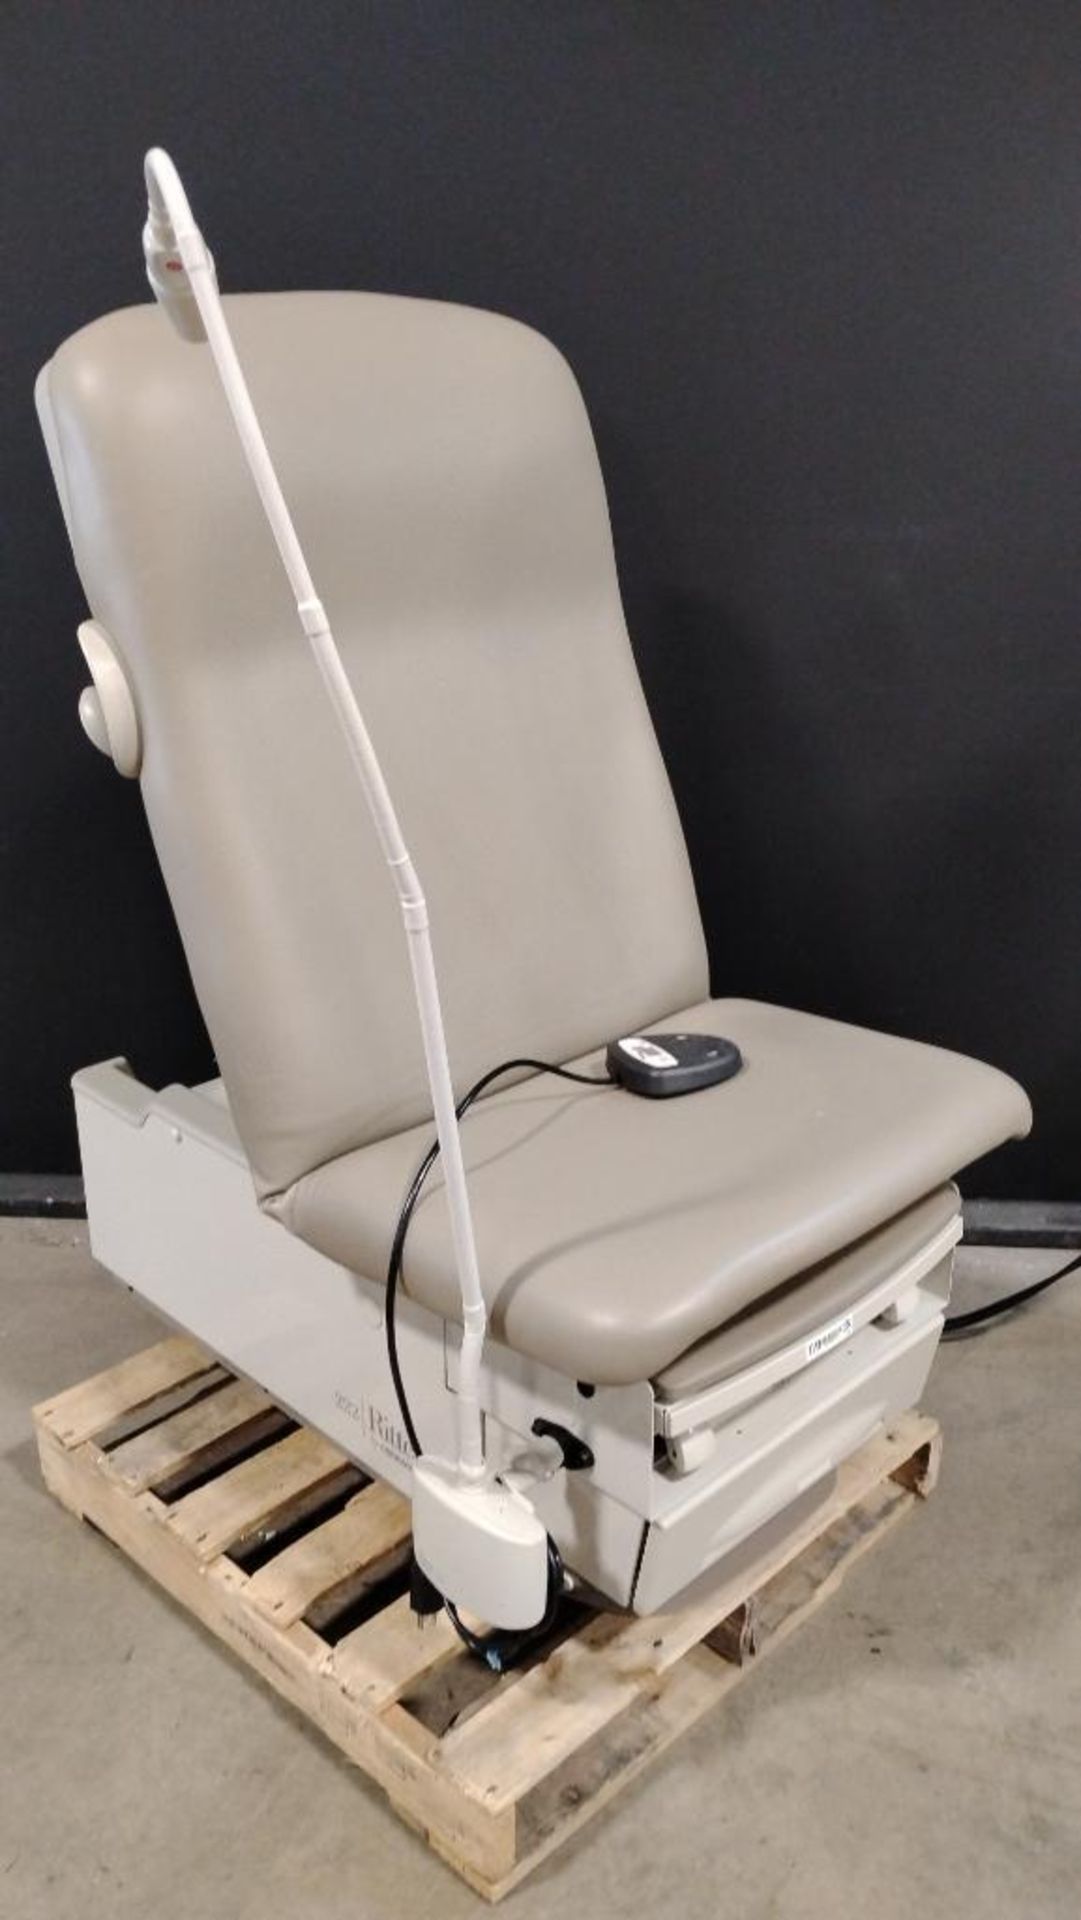 RITTER 222 POWER EXAM TABLE WITH FOOTSWITCH - Image 3 of 5